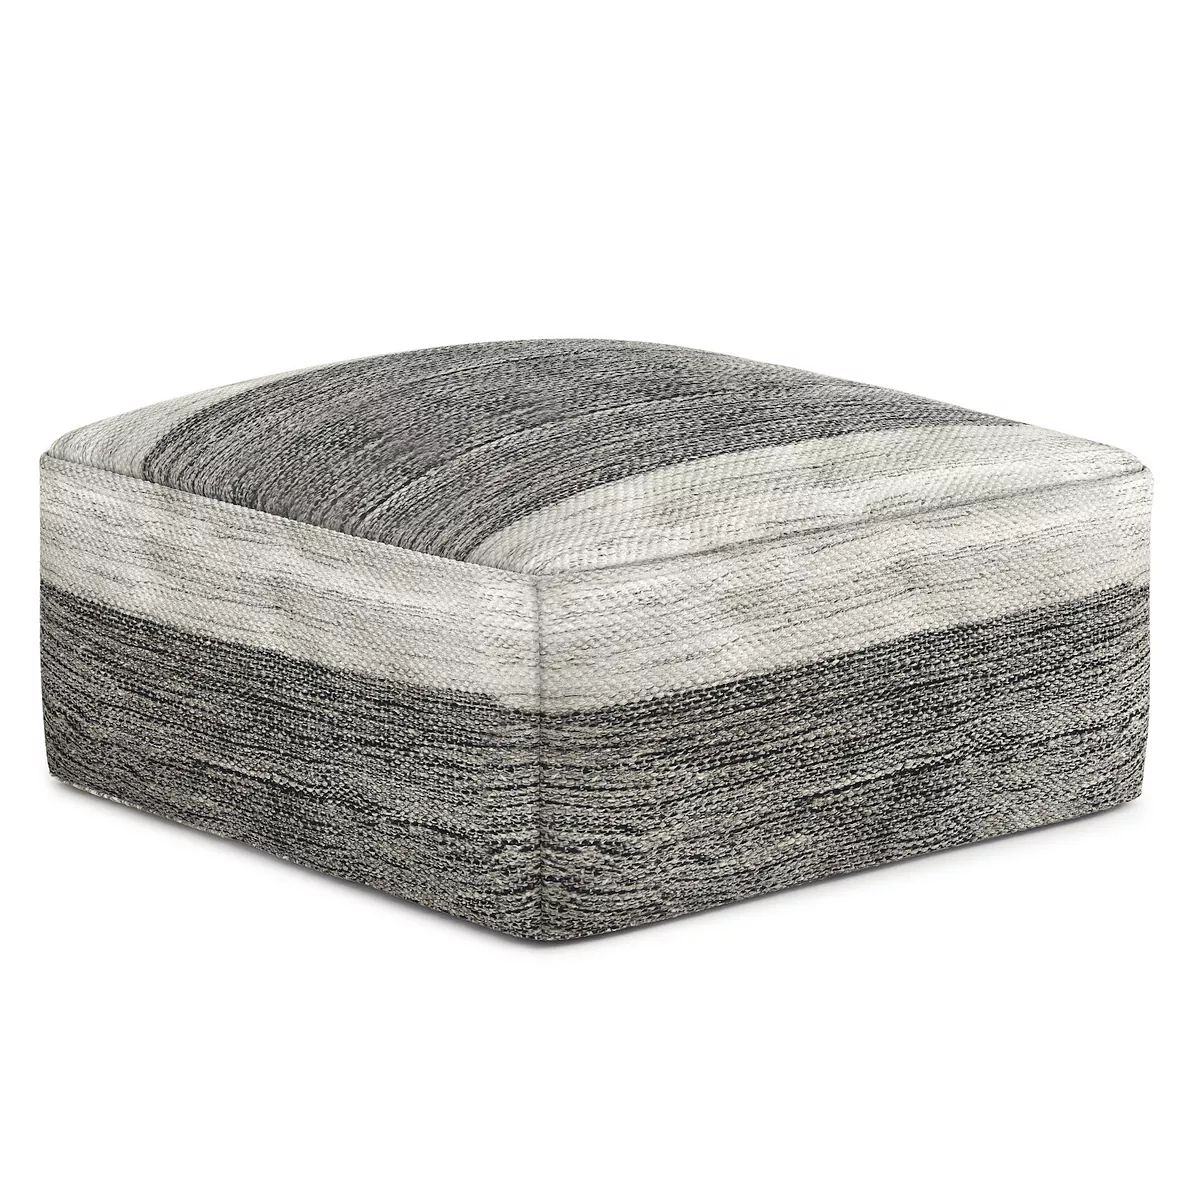 Simpli Home Mathis Square Woven Indoor / Outdoor Pouf | Kohl's